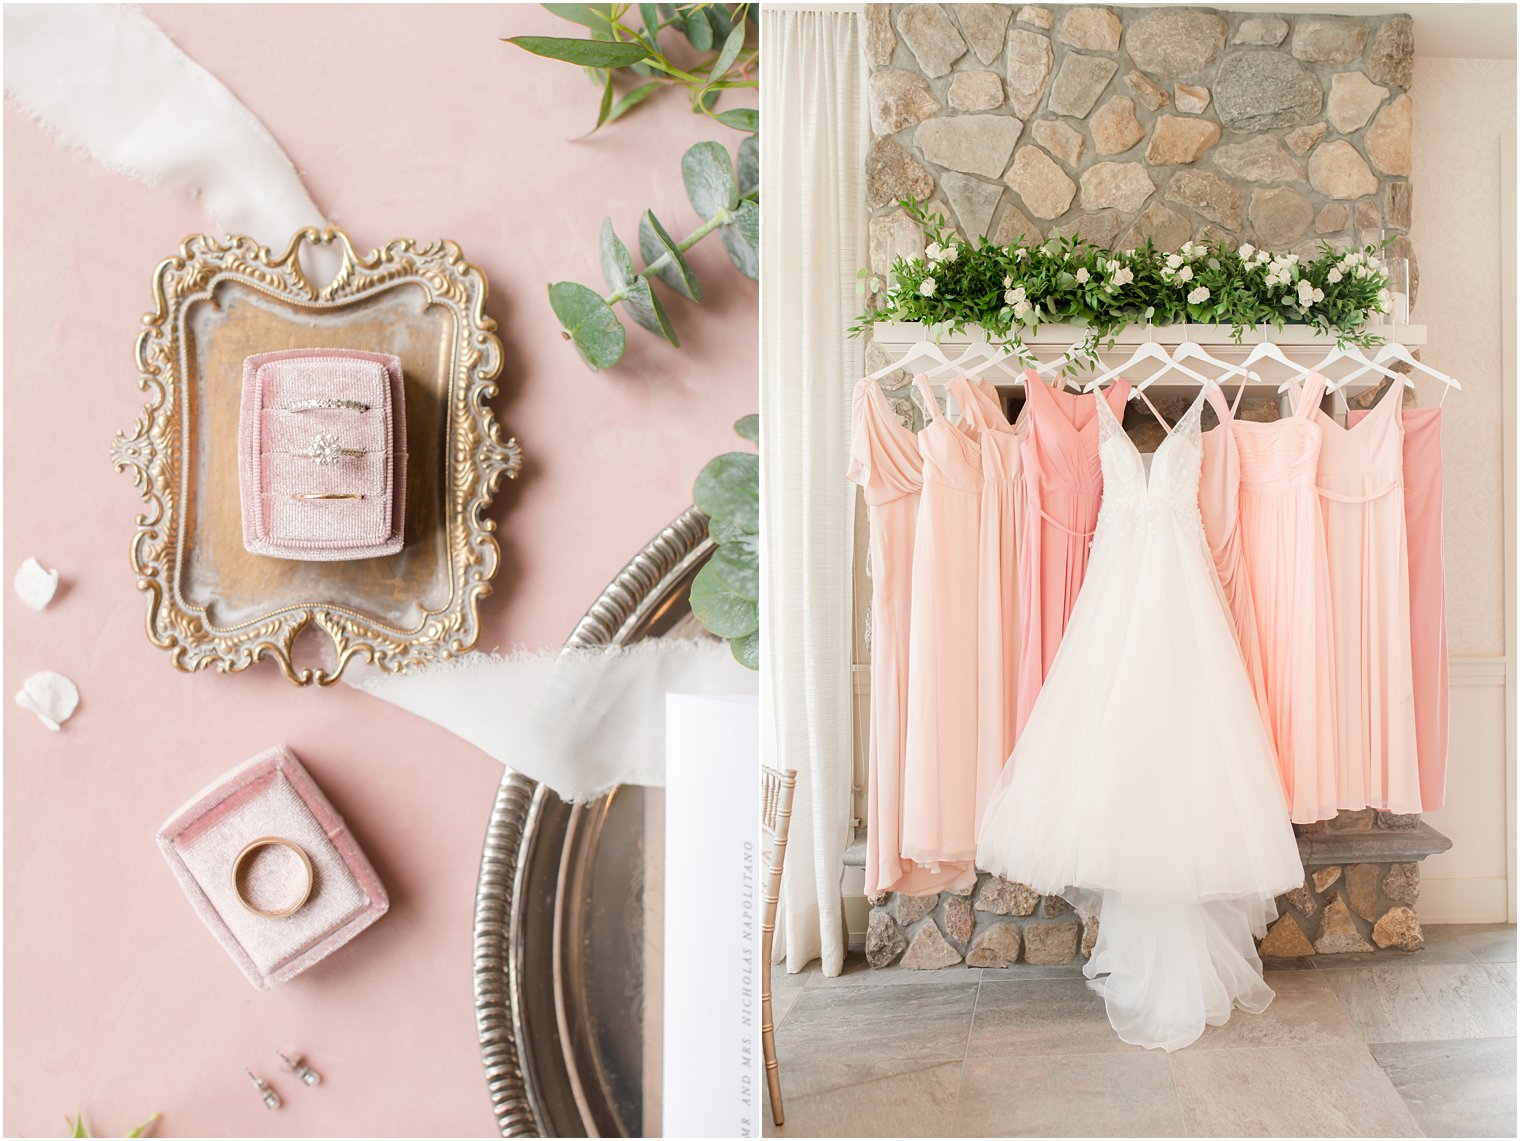 wedding rings rest in pink box and bride's dress hangs with bridesmaids gowns